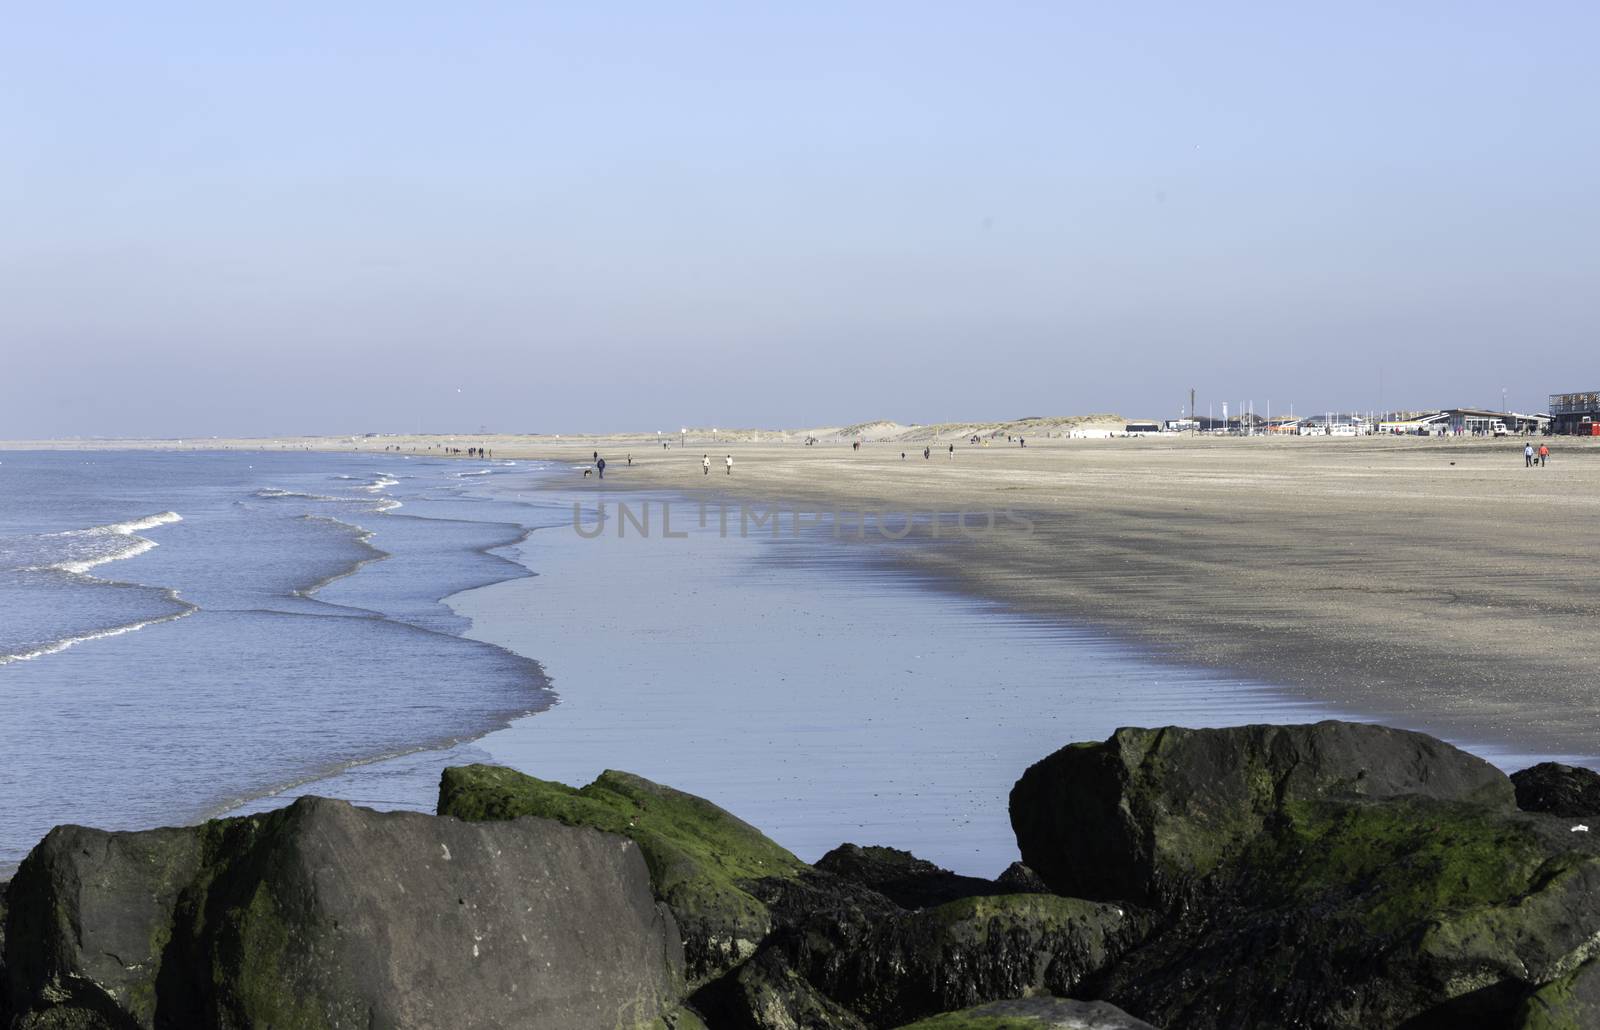 HOEK VAN HOLLAND,NETHERLANDS - FEBRUARI 17: Unidentified people walking on the beach near the sea on Februari 17 2016 in Hoek van Holland, this beach is the beach with the view on inccoming ships to Rotterdam harbour.